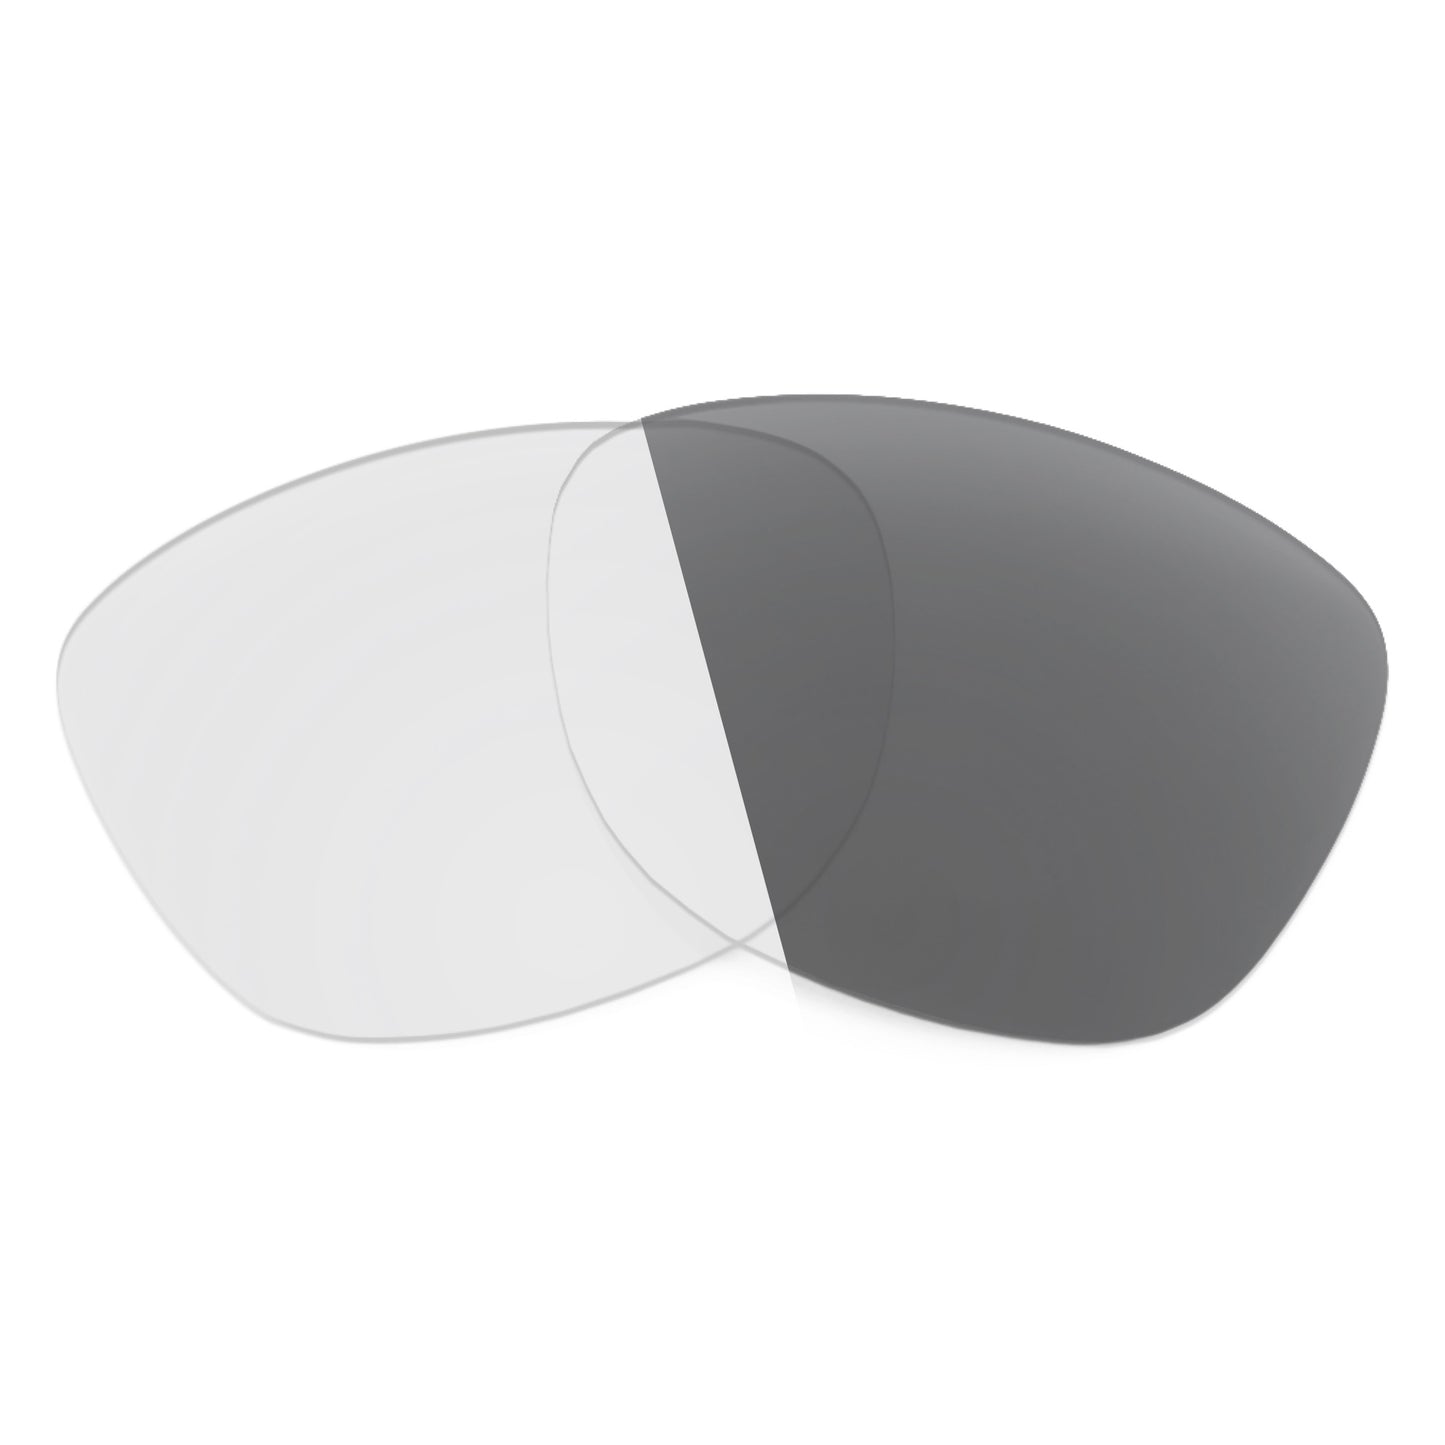 Revant replacement lenses for Ray-Ban Hexagonal RB3548N 48mm Non-Polarized Adapt Gray Photochromic